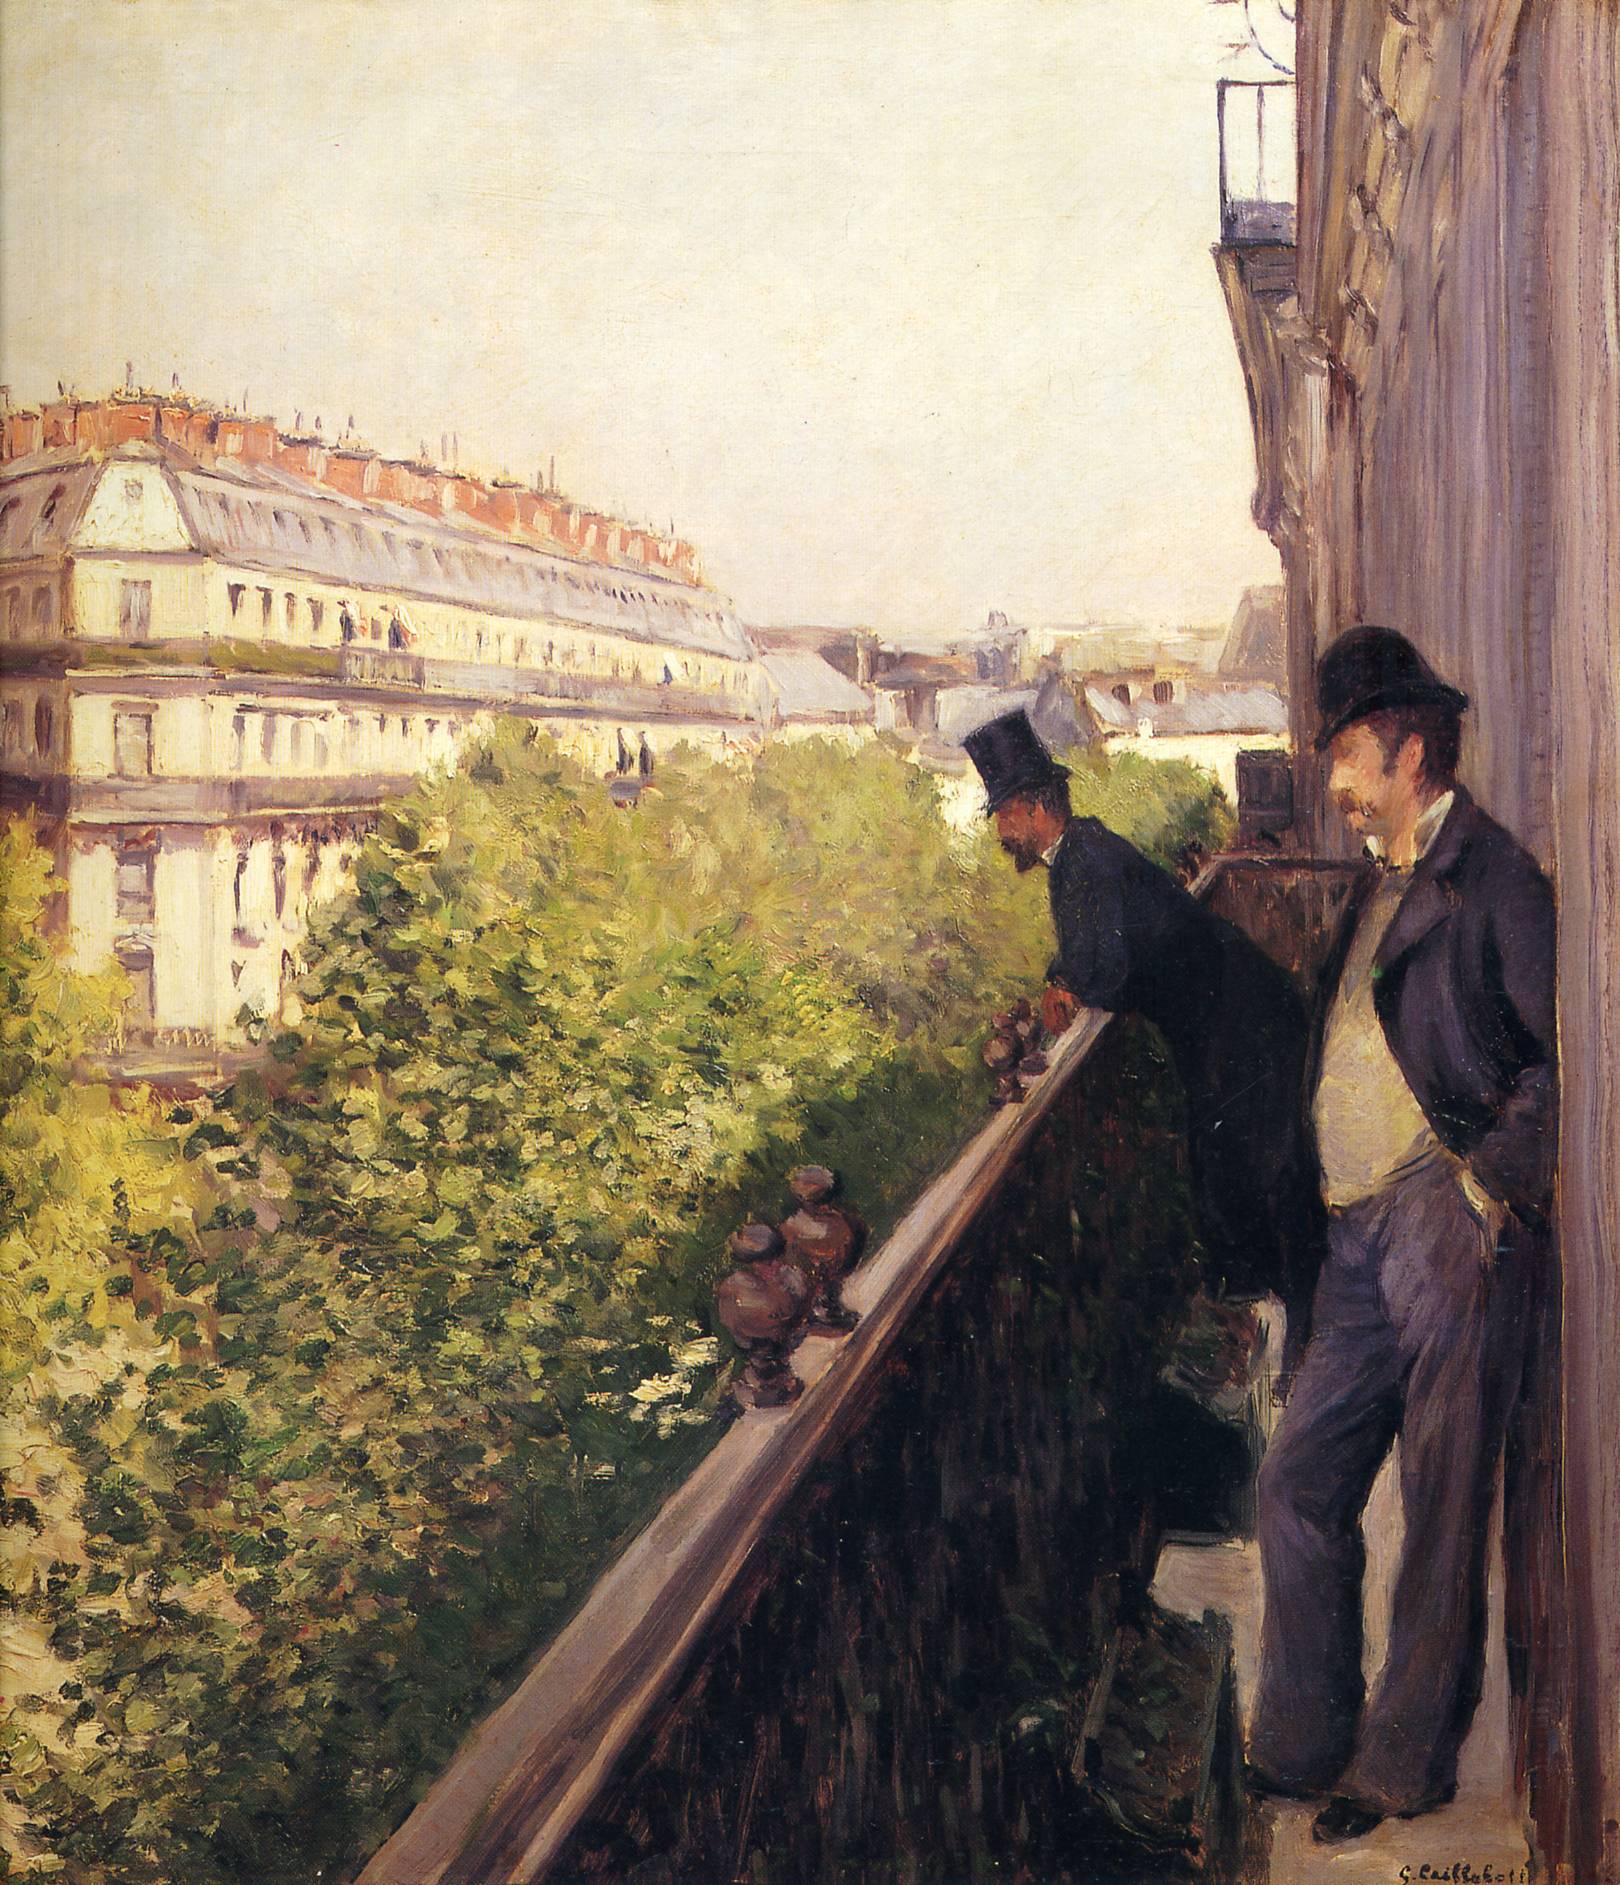 A Balcony, Boulevard Haussmann by Gustave Caillebotte - 1880 - - private collection